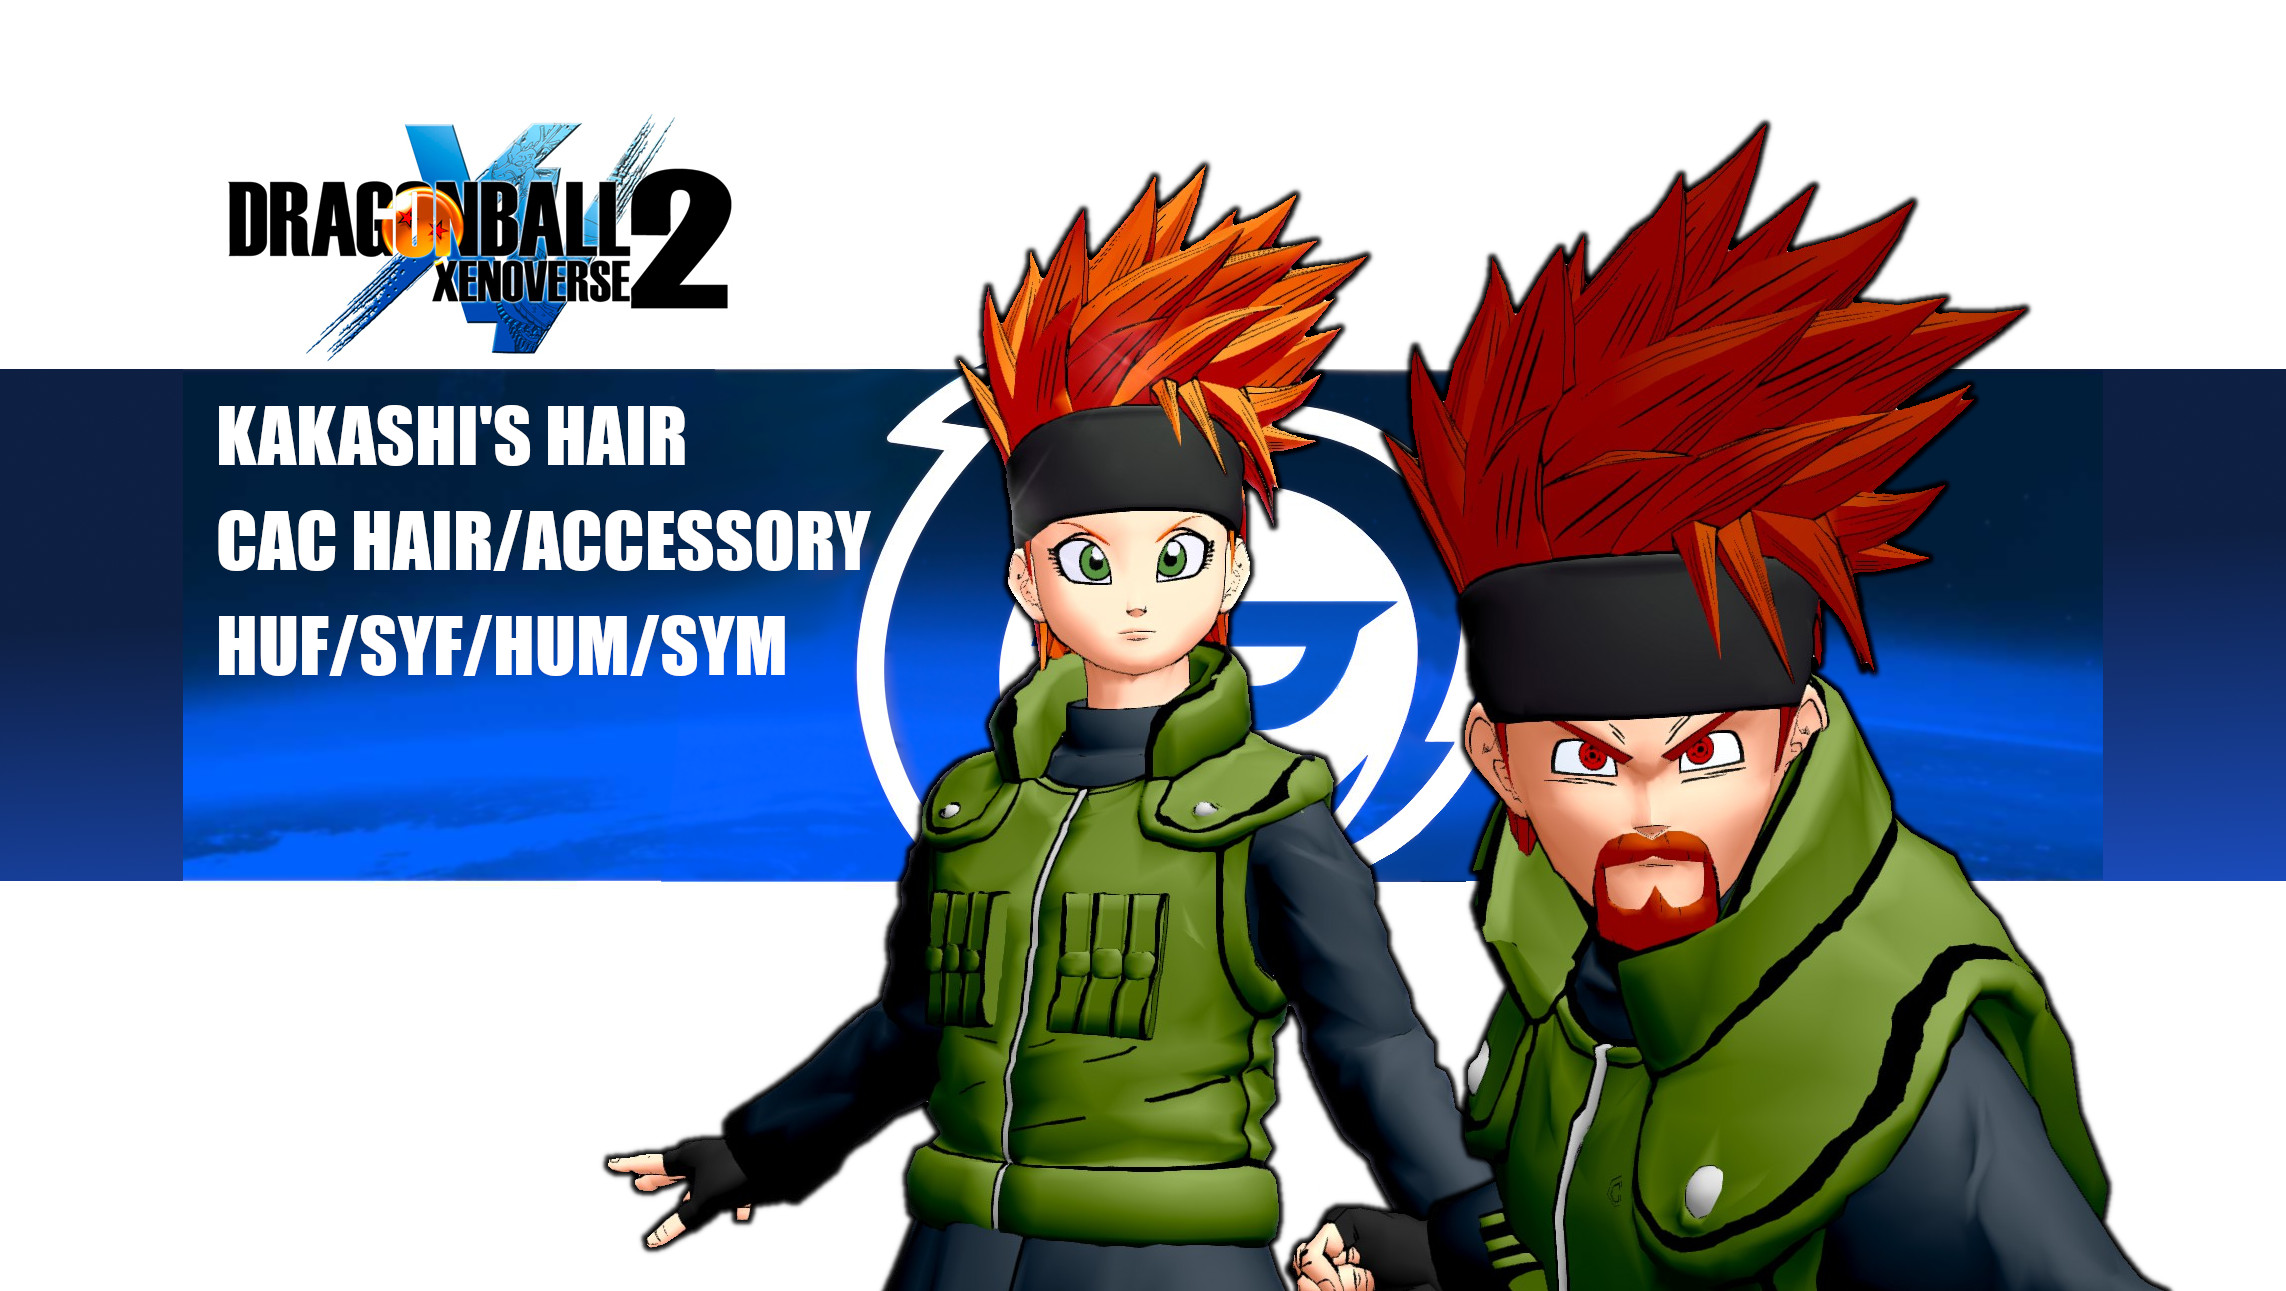 Kakashi’s Hair (Replacer, Accessory and Installer)